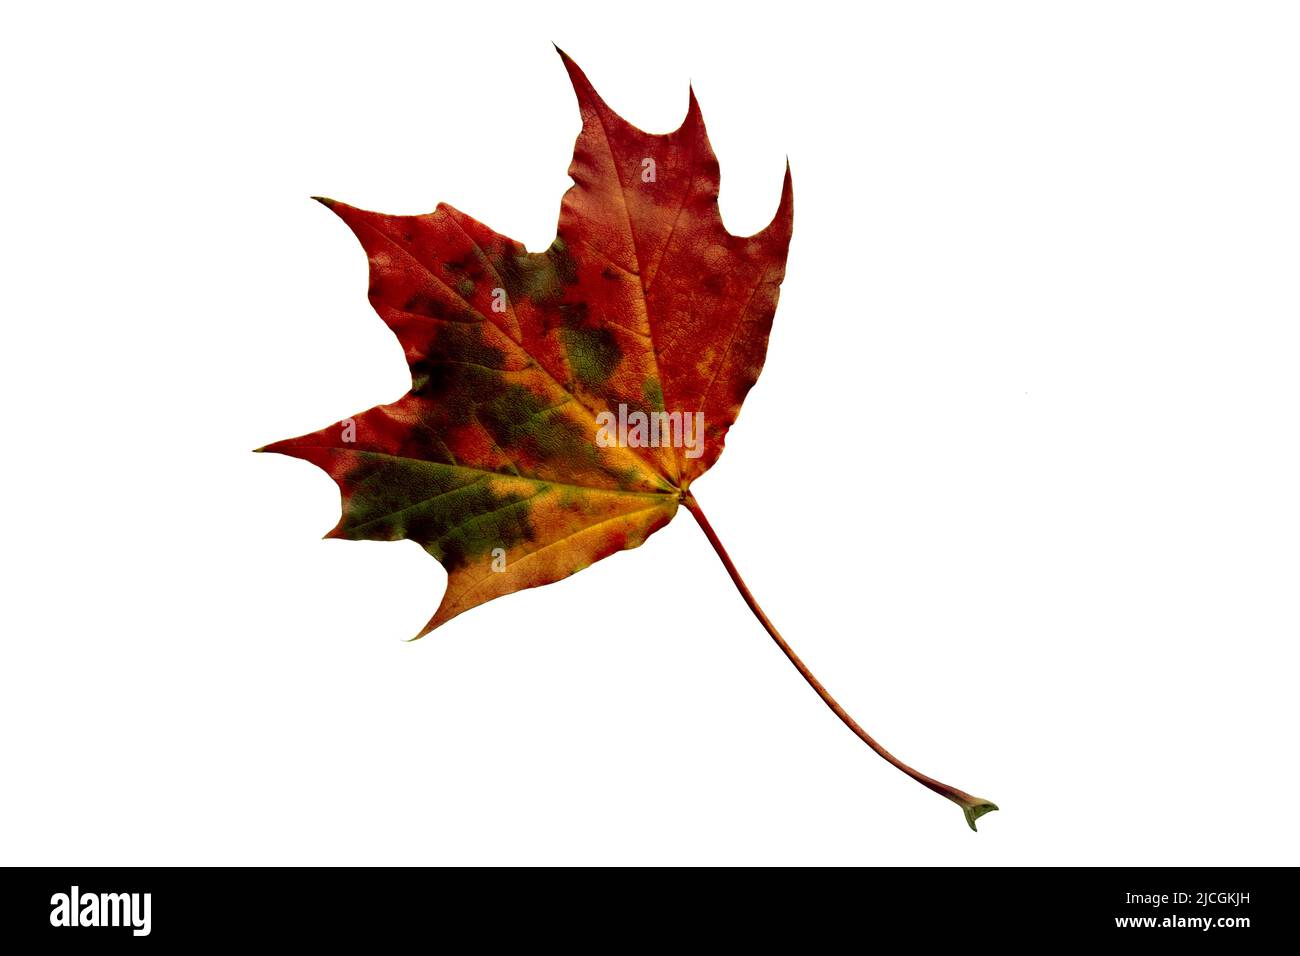 Fallen multicolored maple leaf on a white background. Collage isolate Stock Photo